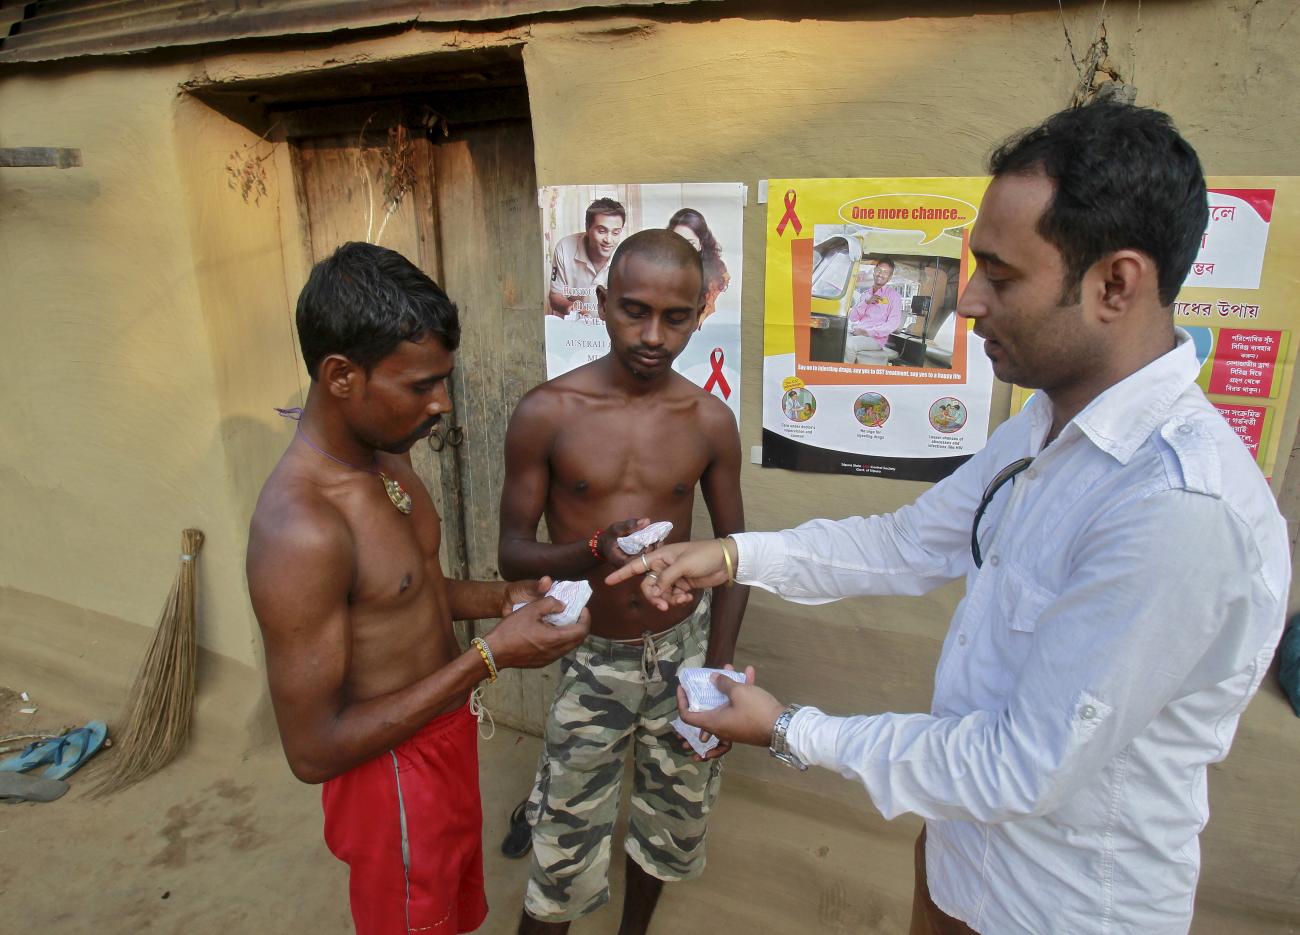 A volunteer distributes free condoms to villagers during an AIDS awareness campaign on the outskirts of Agartala, India on November 6, 2015. 